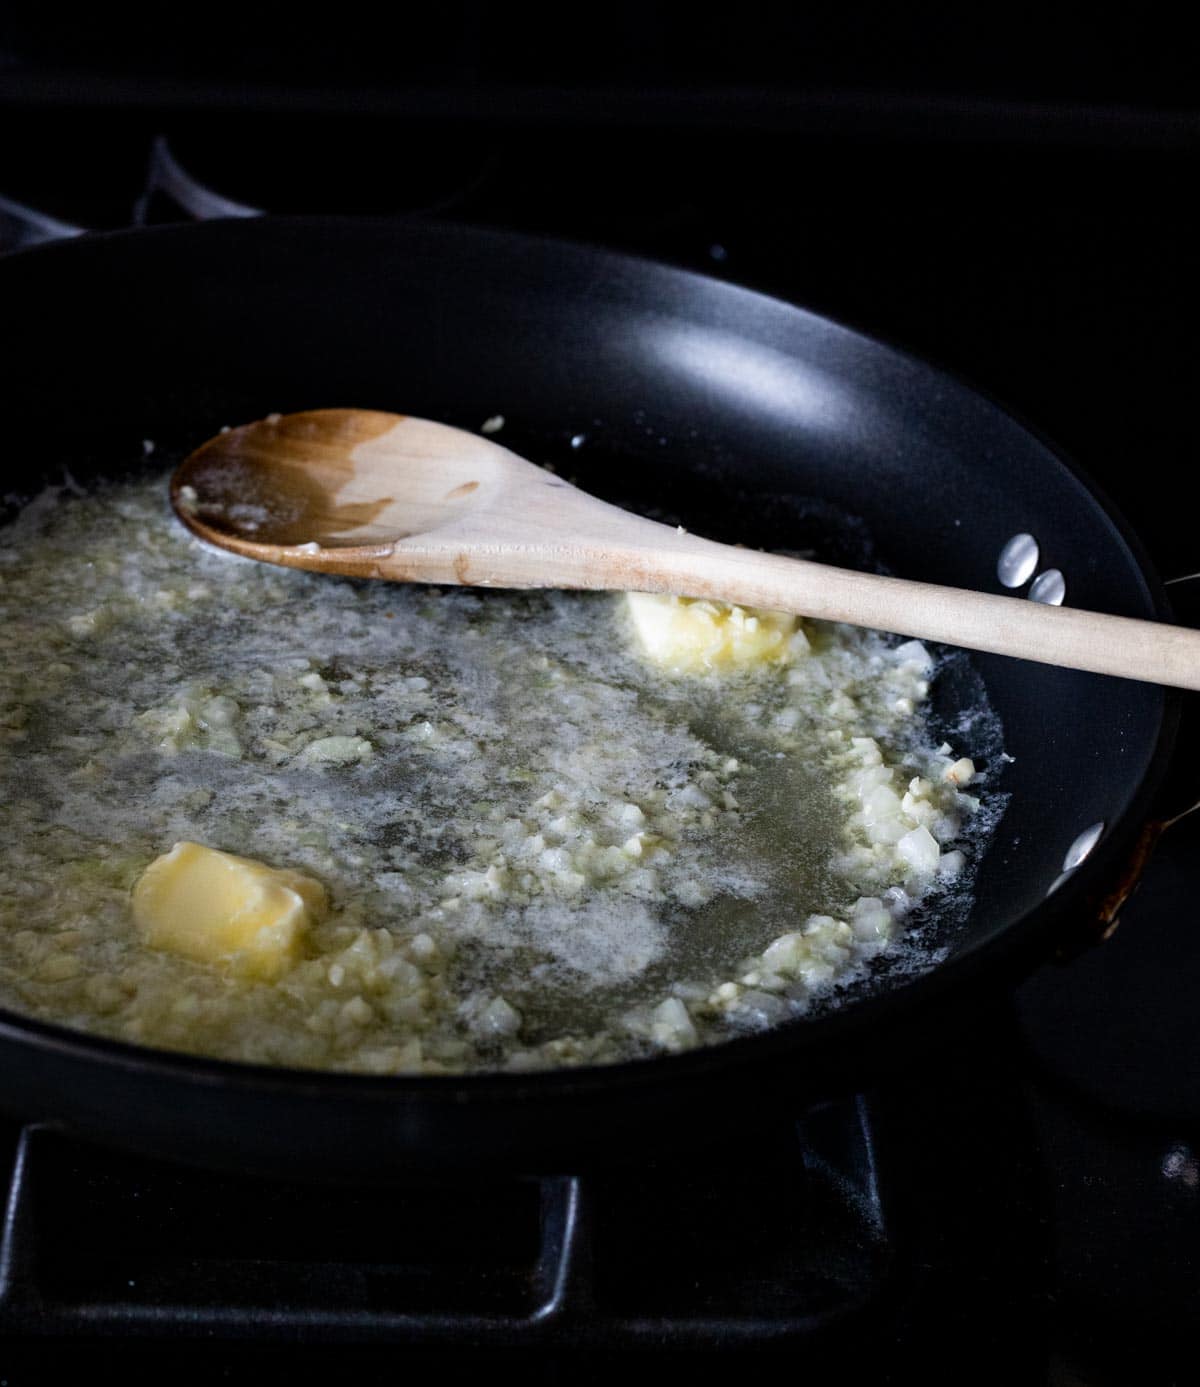 Butter, onion and garlic cooking in a skillet on the stovetop.